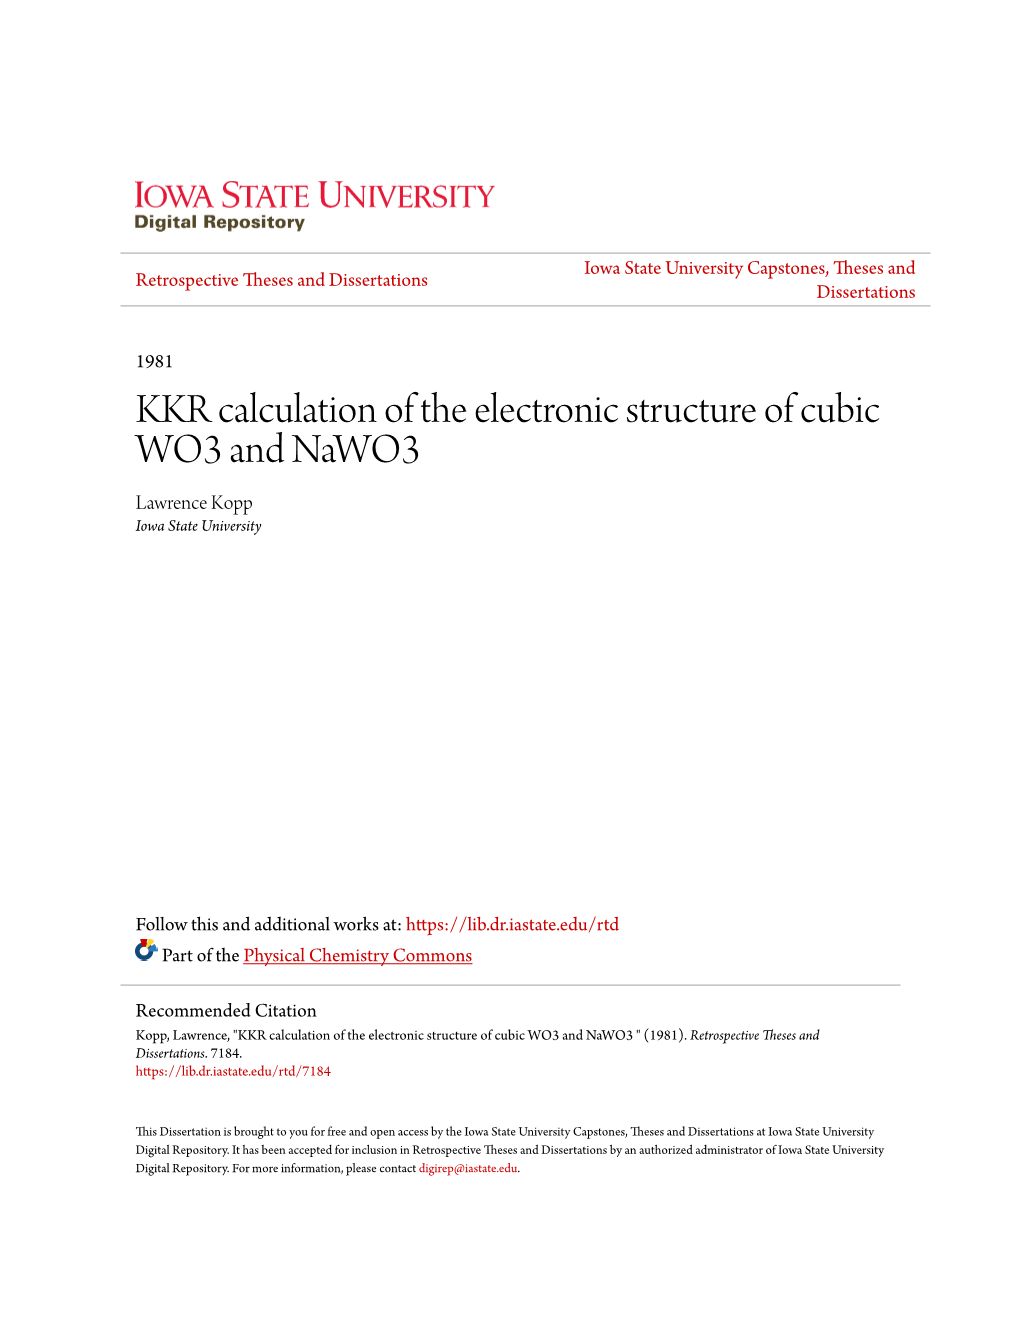 KKR Calculation of the Electronic Structure of Cubic WO3 and Nawo3 Lawrence Kopp Iowa State University